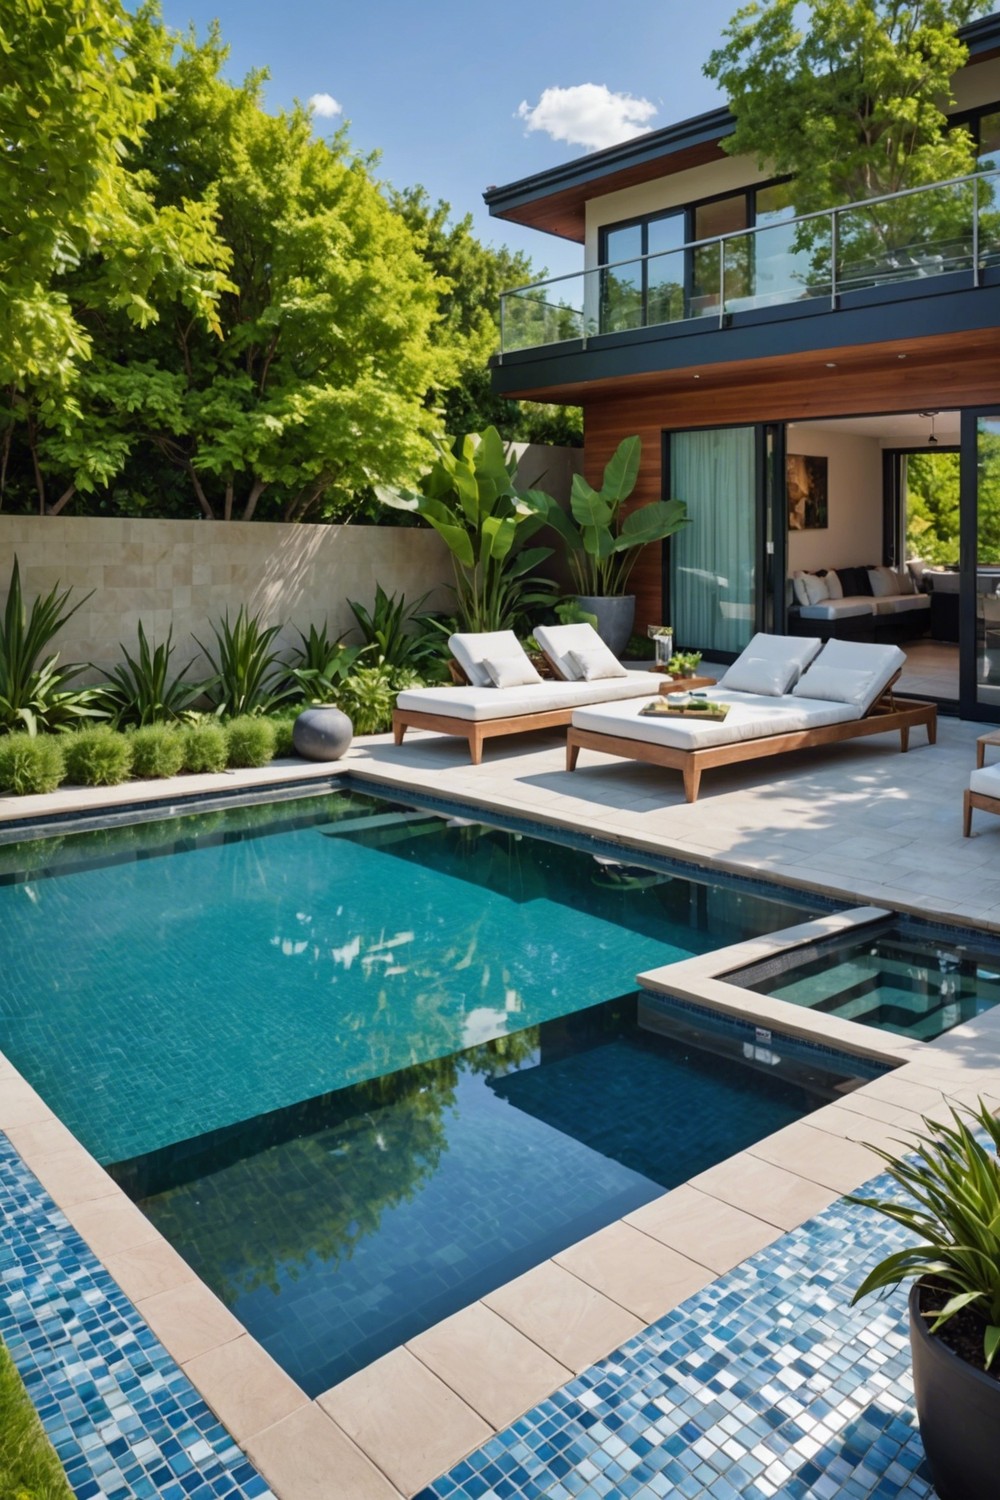 Raised Pool with Glass Tile Interior